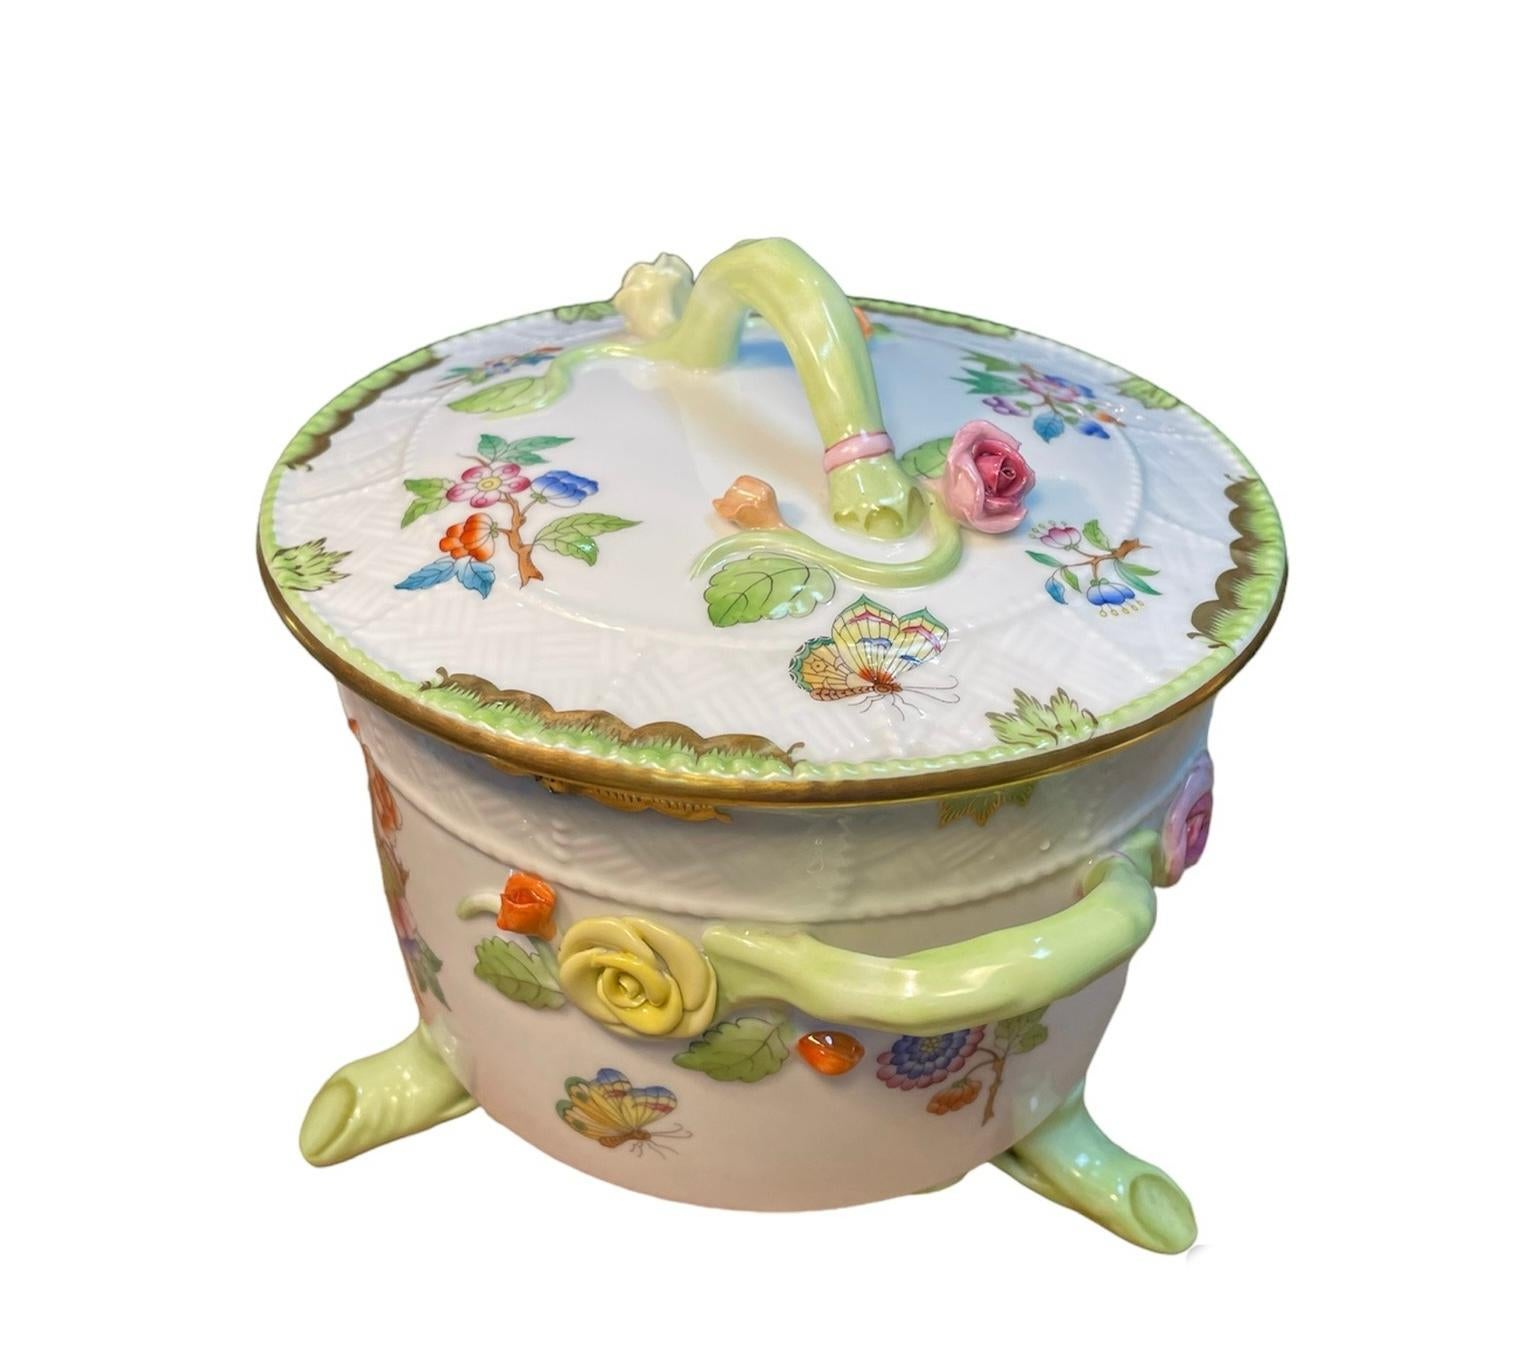 Herend Porcelain Queen Victoria Pattern Lidded Biscuit Box For Sale 1